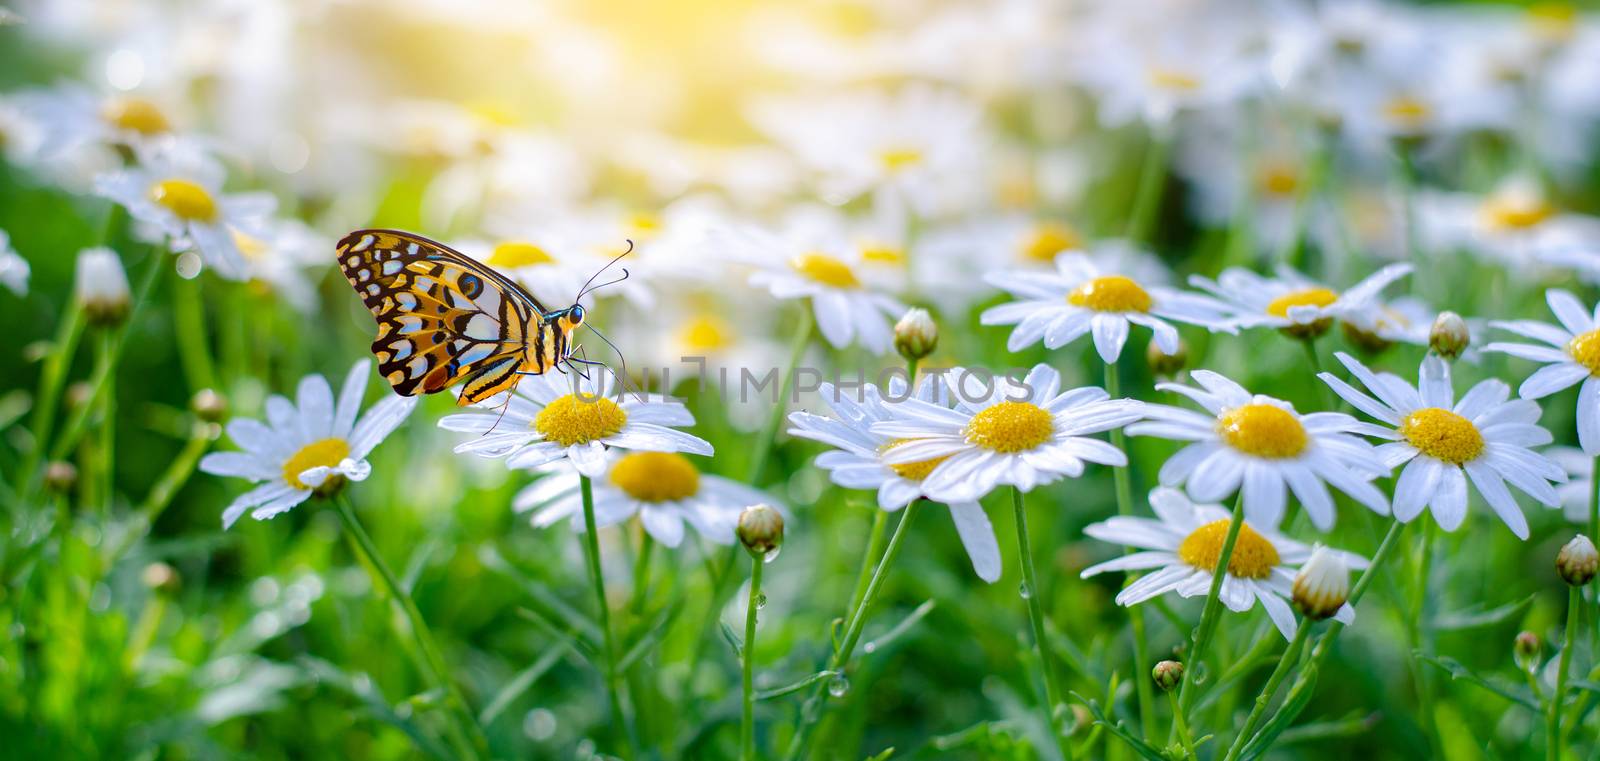 The yellow orange butterfly is on the white pink flowers in the green grass fields by sarayut_thaneerat